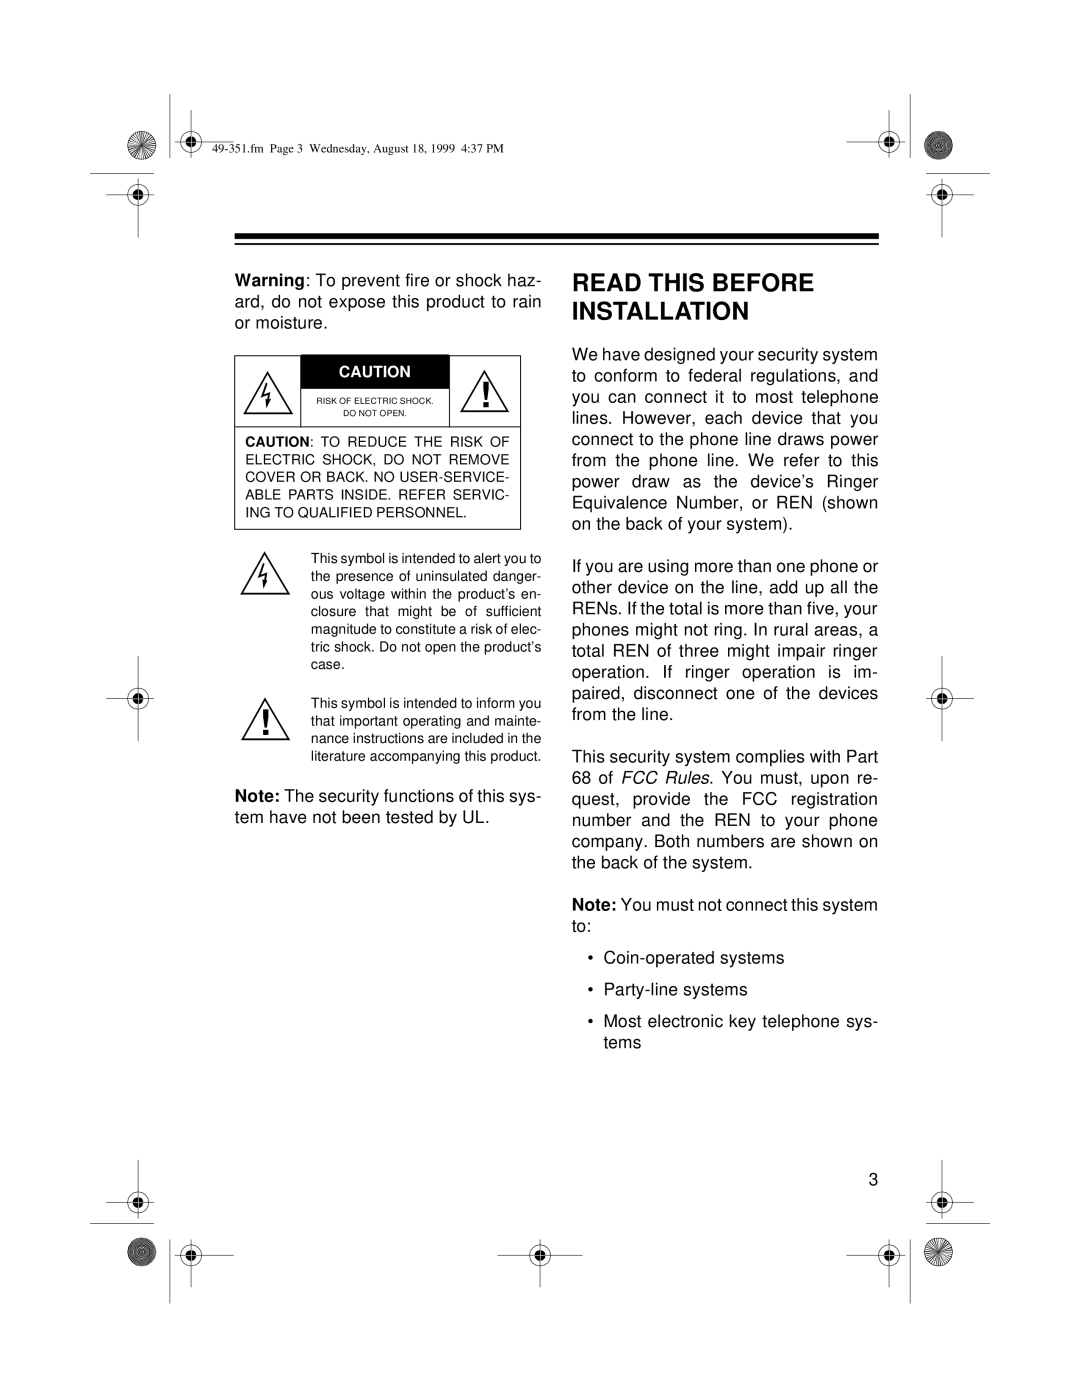 Radio Shack 49-351 owner manual Read This Before Installation 